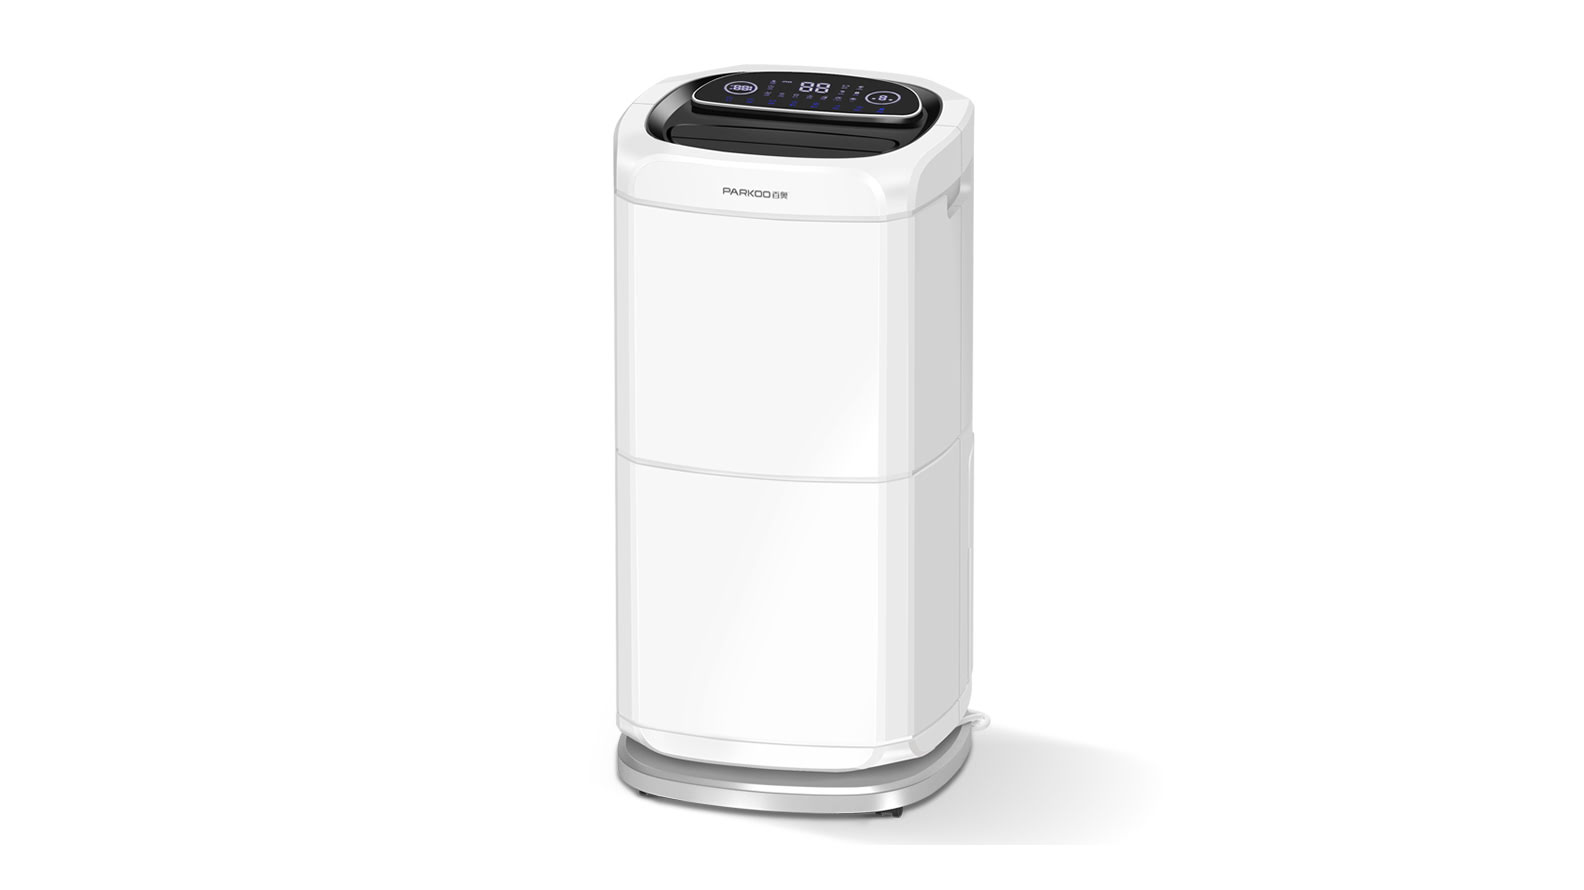 Why buy a dehumidifier when there are so many different ways to dehumidify?